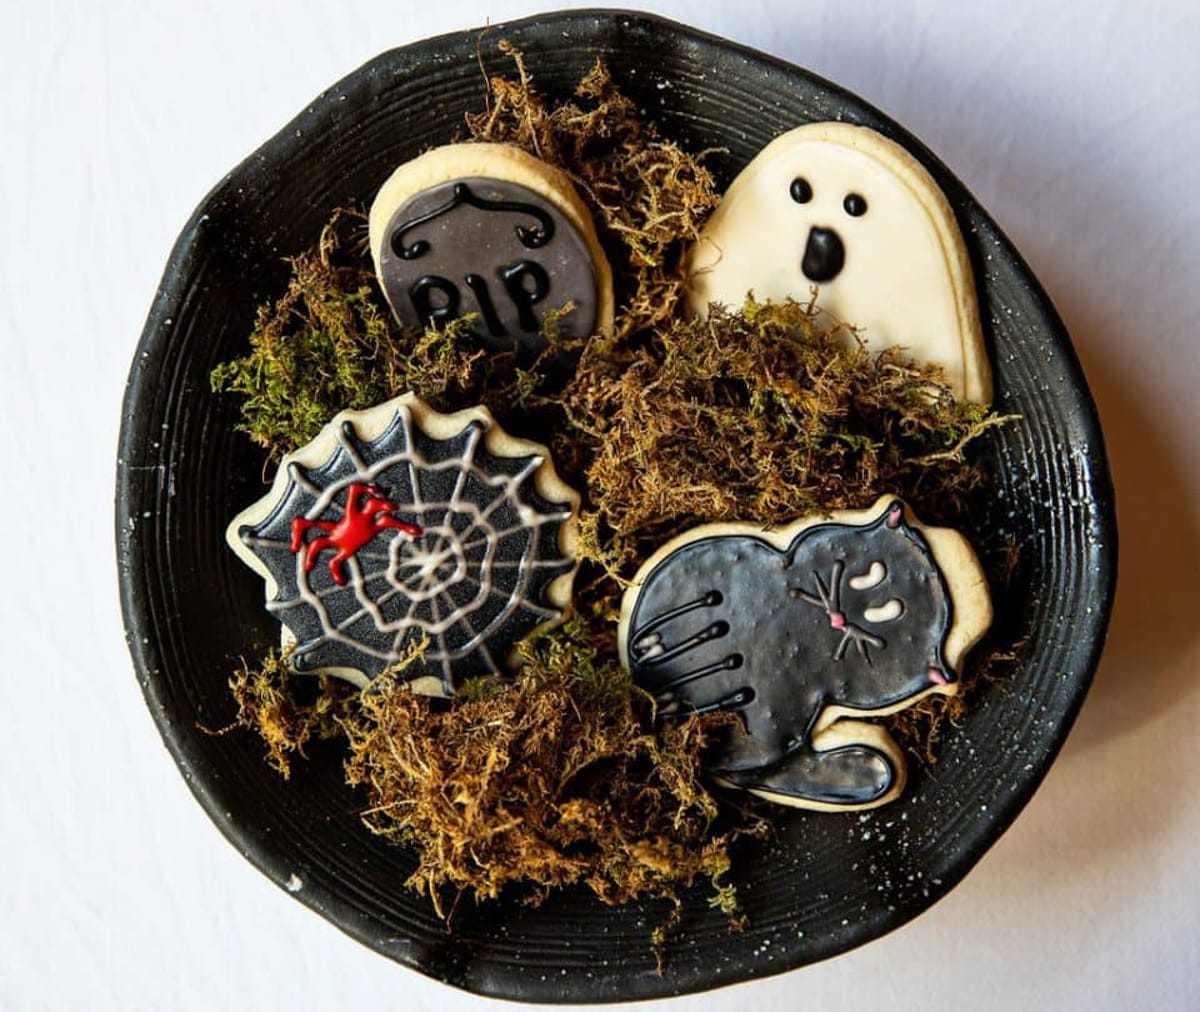 House-made Halloween cookies at The Charleston Place